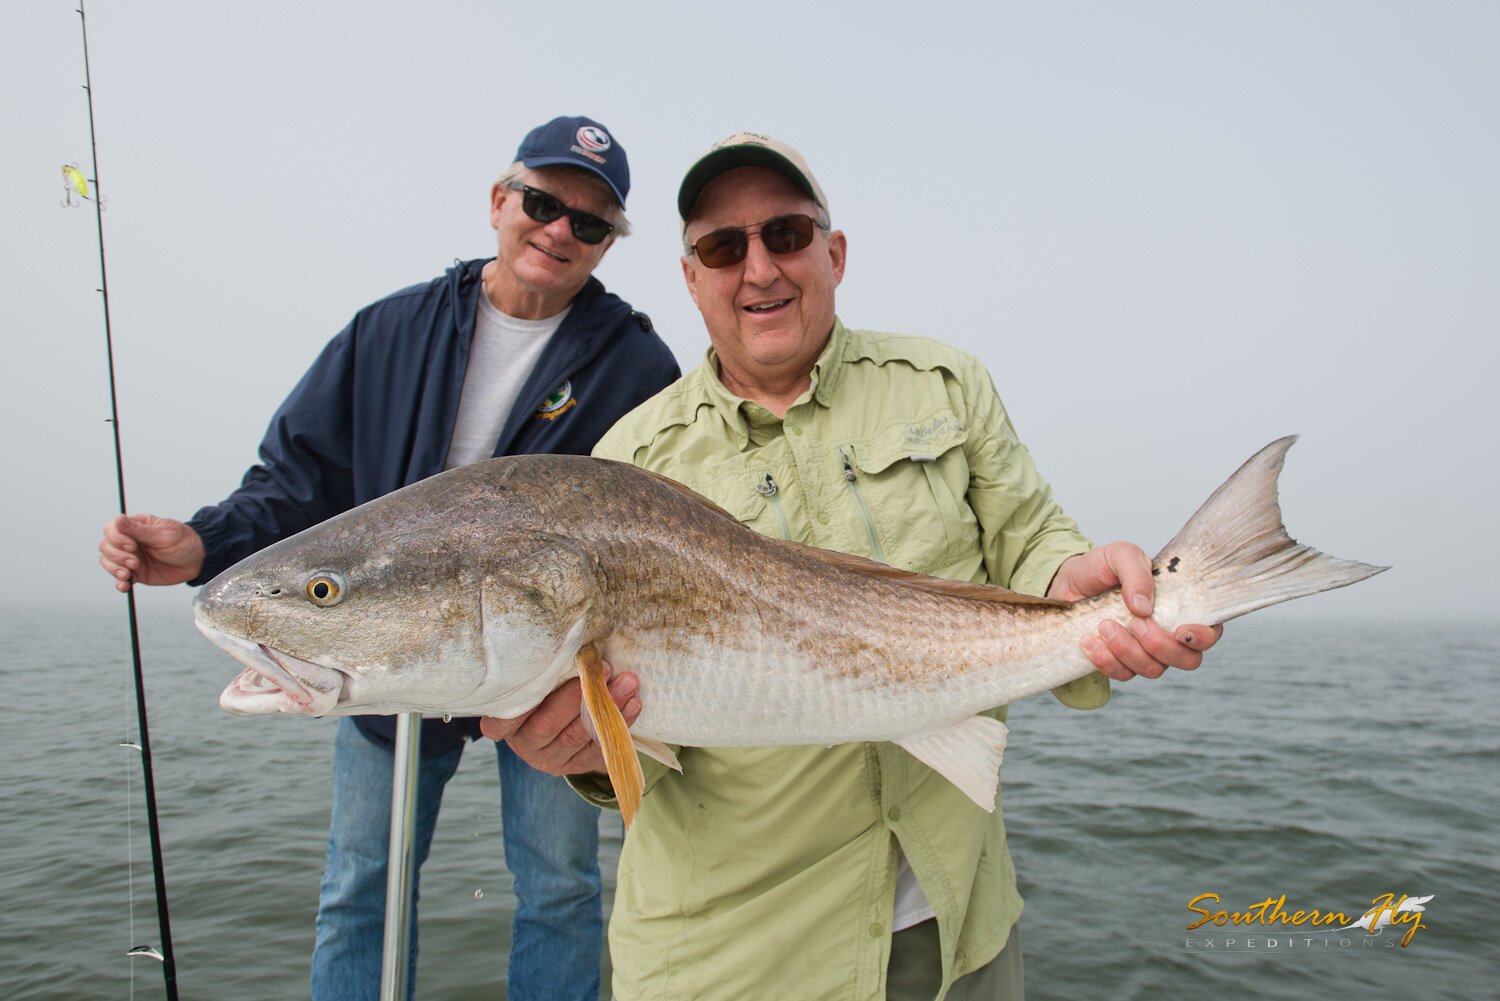 2020-01-16_SouthernFlyExpeditions_NewOrleans_RickCrivelloneAndMikePurcell-3.jpg